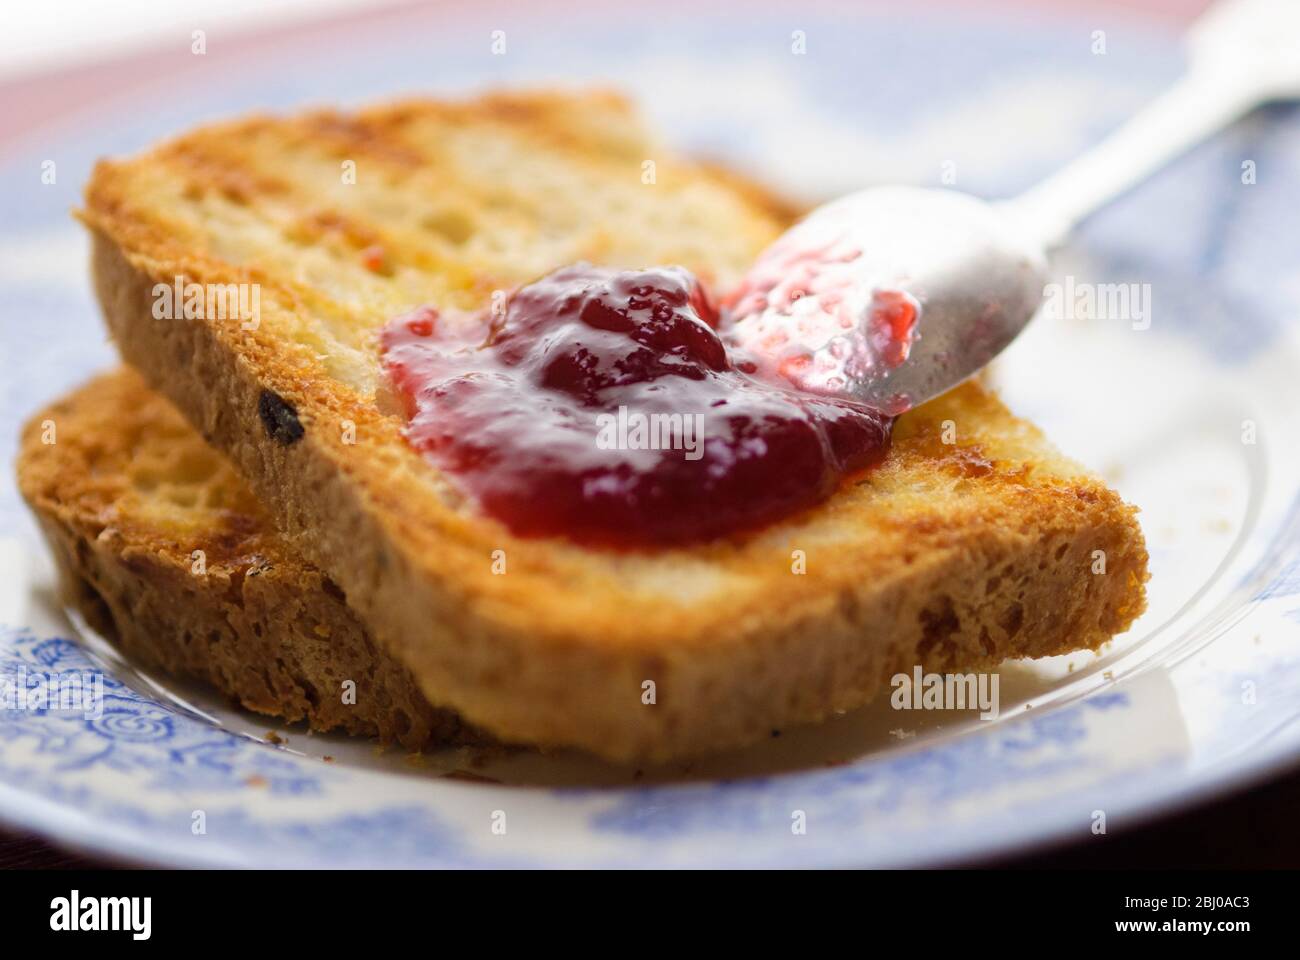 Home made jam on toast made from gluten free bread with silver spoon Stock Photo